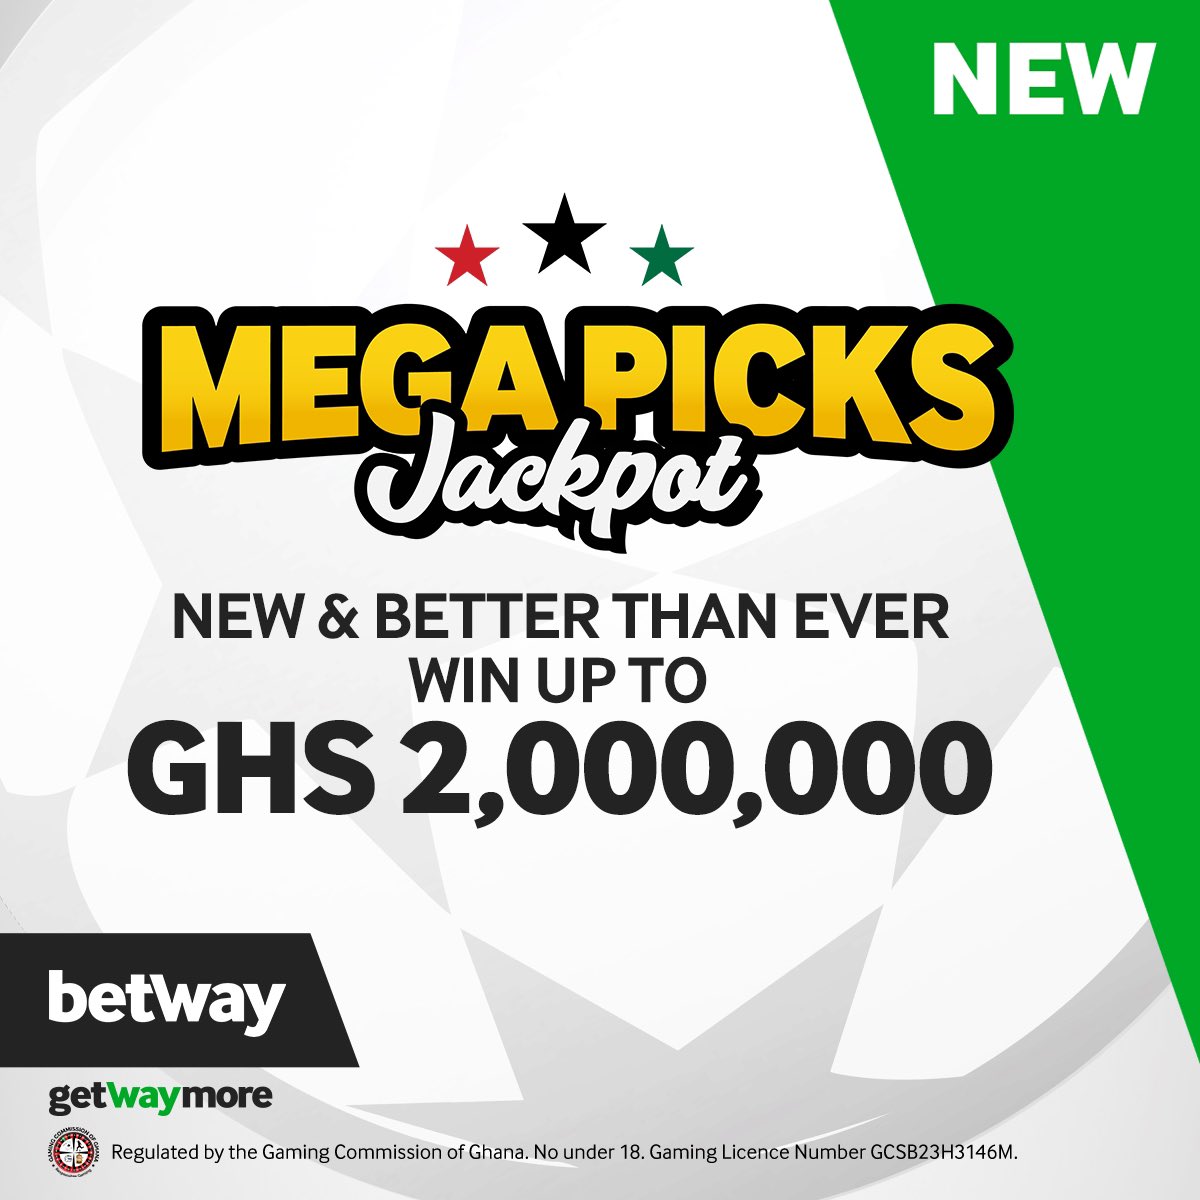 Mega Picks Jackpot 🤑 📦 Select matches in the Jackpot list and stand a chance of winning GHS 2,000,000 when you pick 17 selections. Chale look sharp 🤩 Play here 😉 👉 bit.ly/48CRf5j